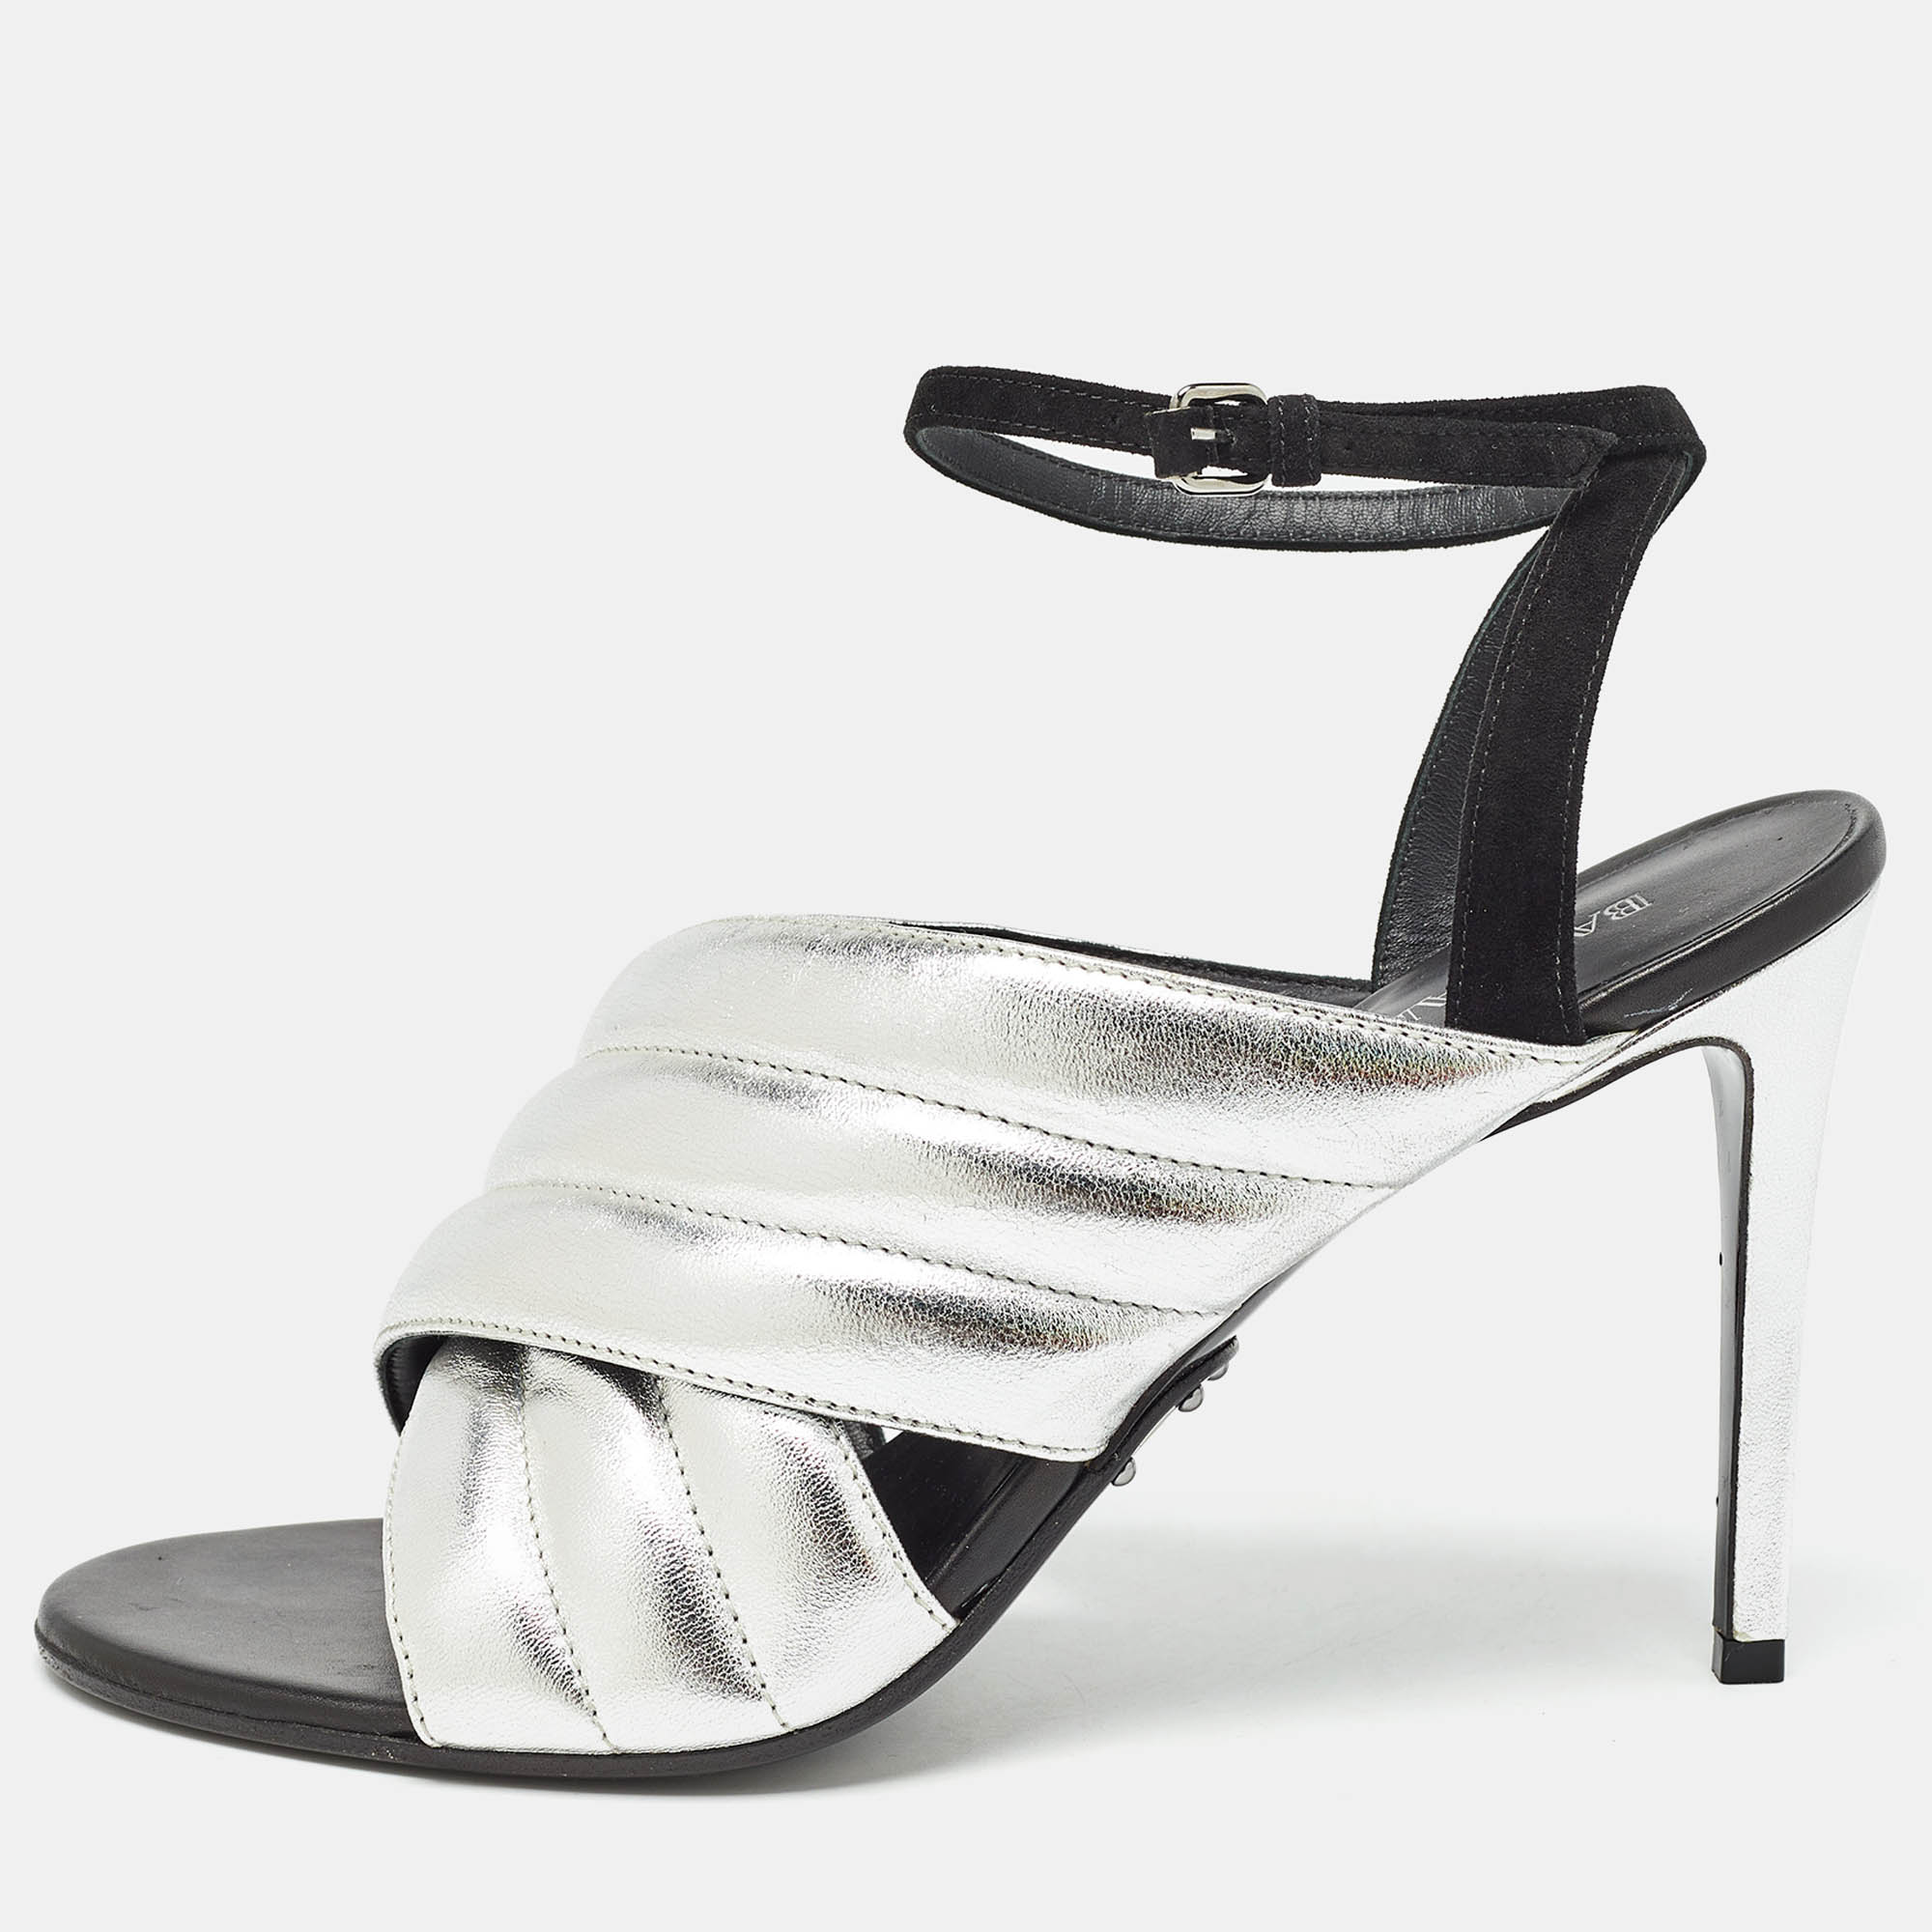 Balmain silver/black quilted leather and suede ankle strap sandals size 40